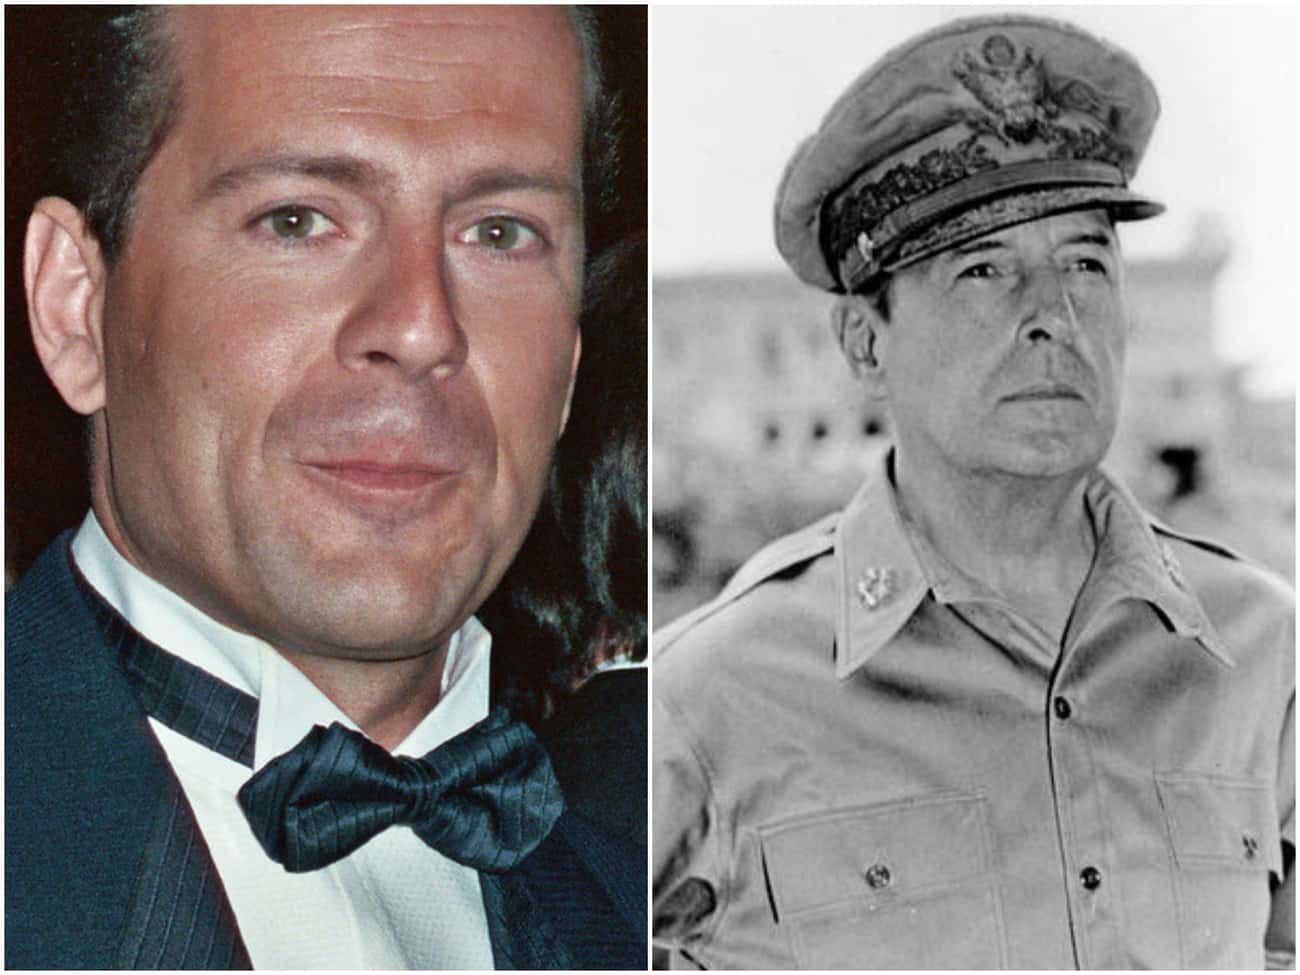 Bruce Willis And His Possible Former Self, General Douglas MacArthur